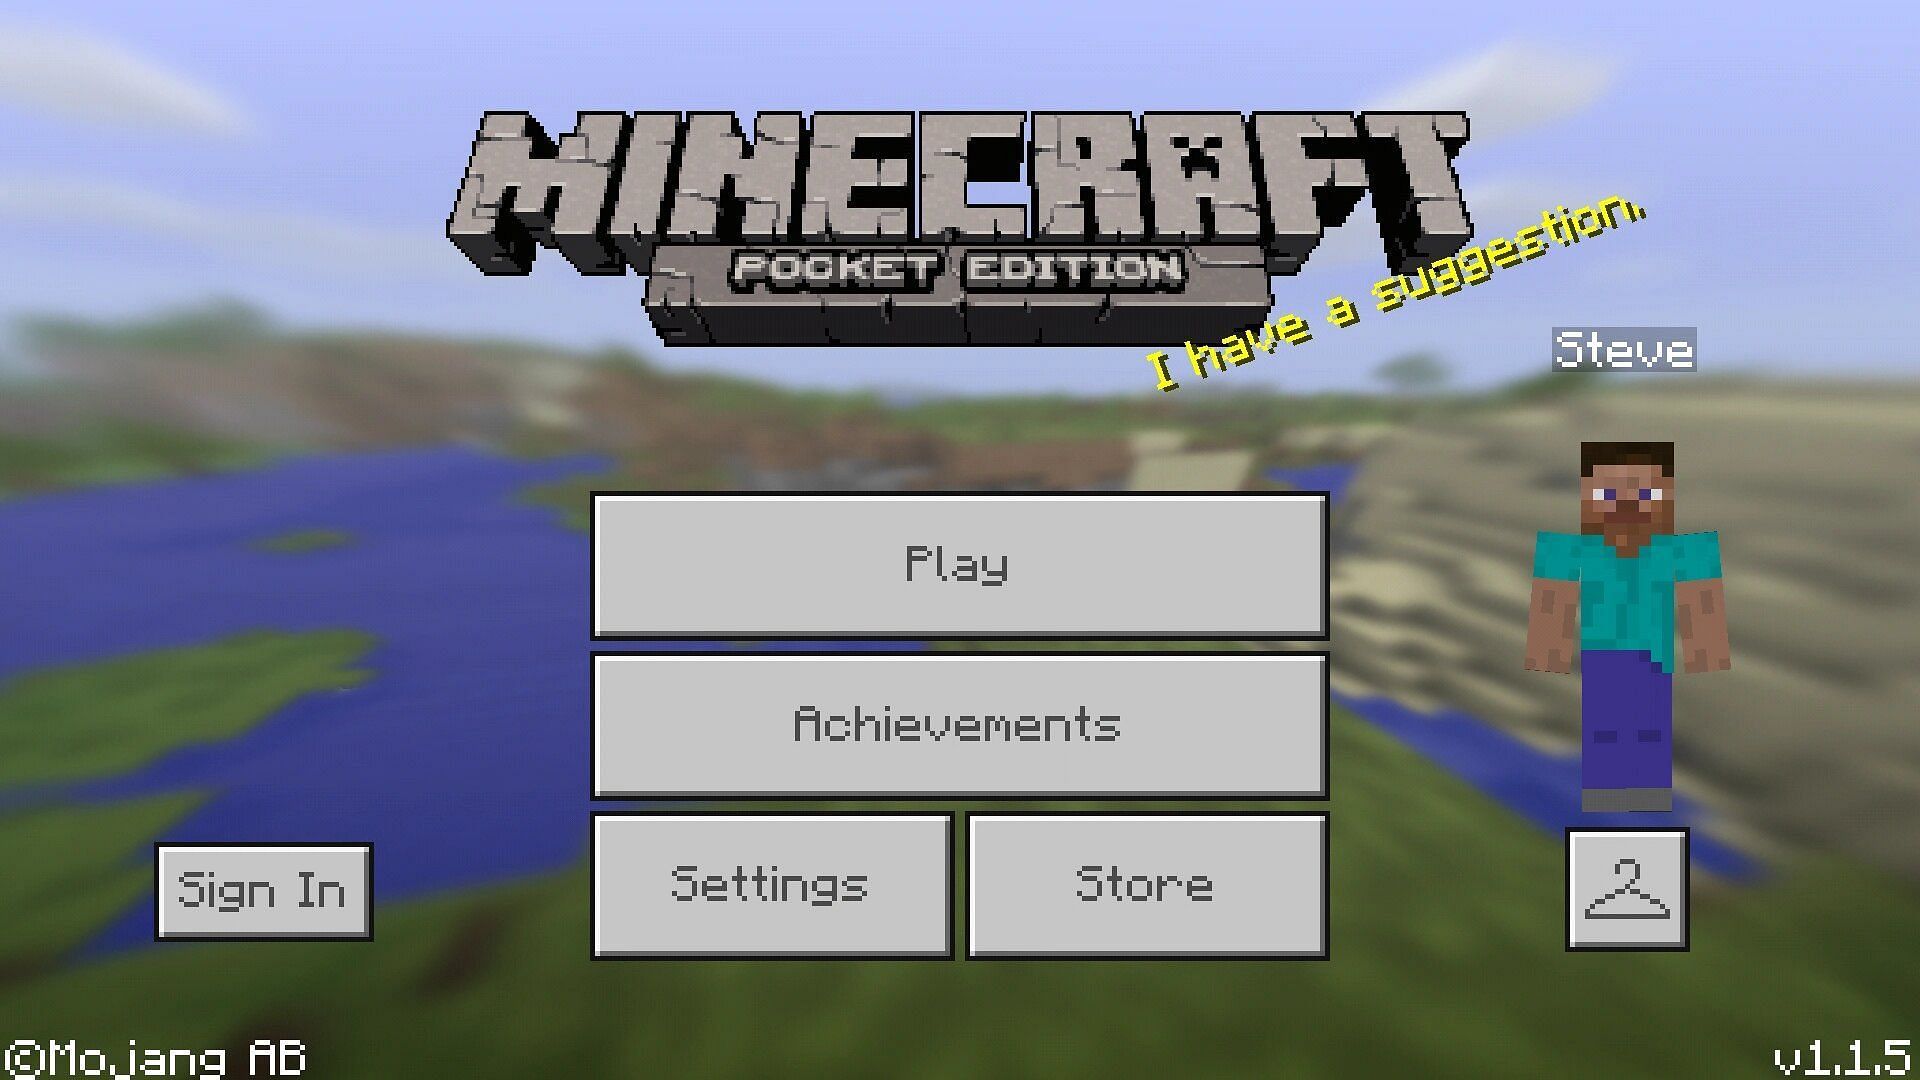 Minecraft 1.20 APK download link for Android devices